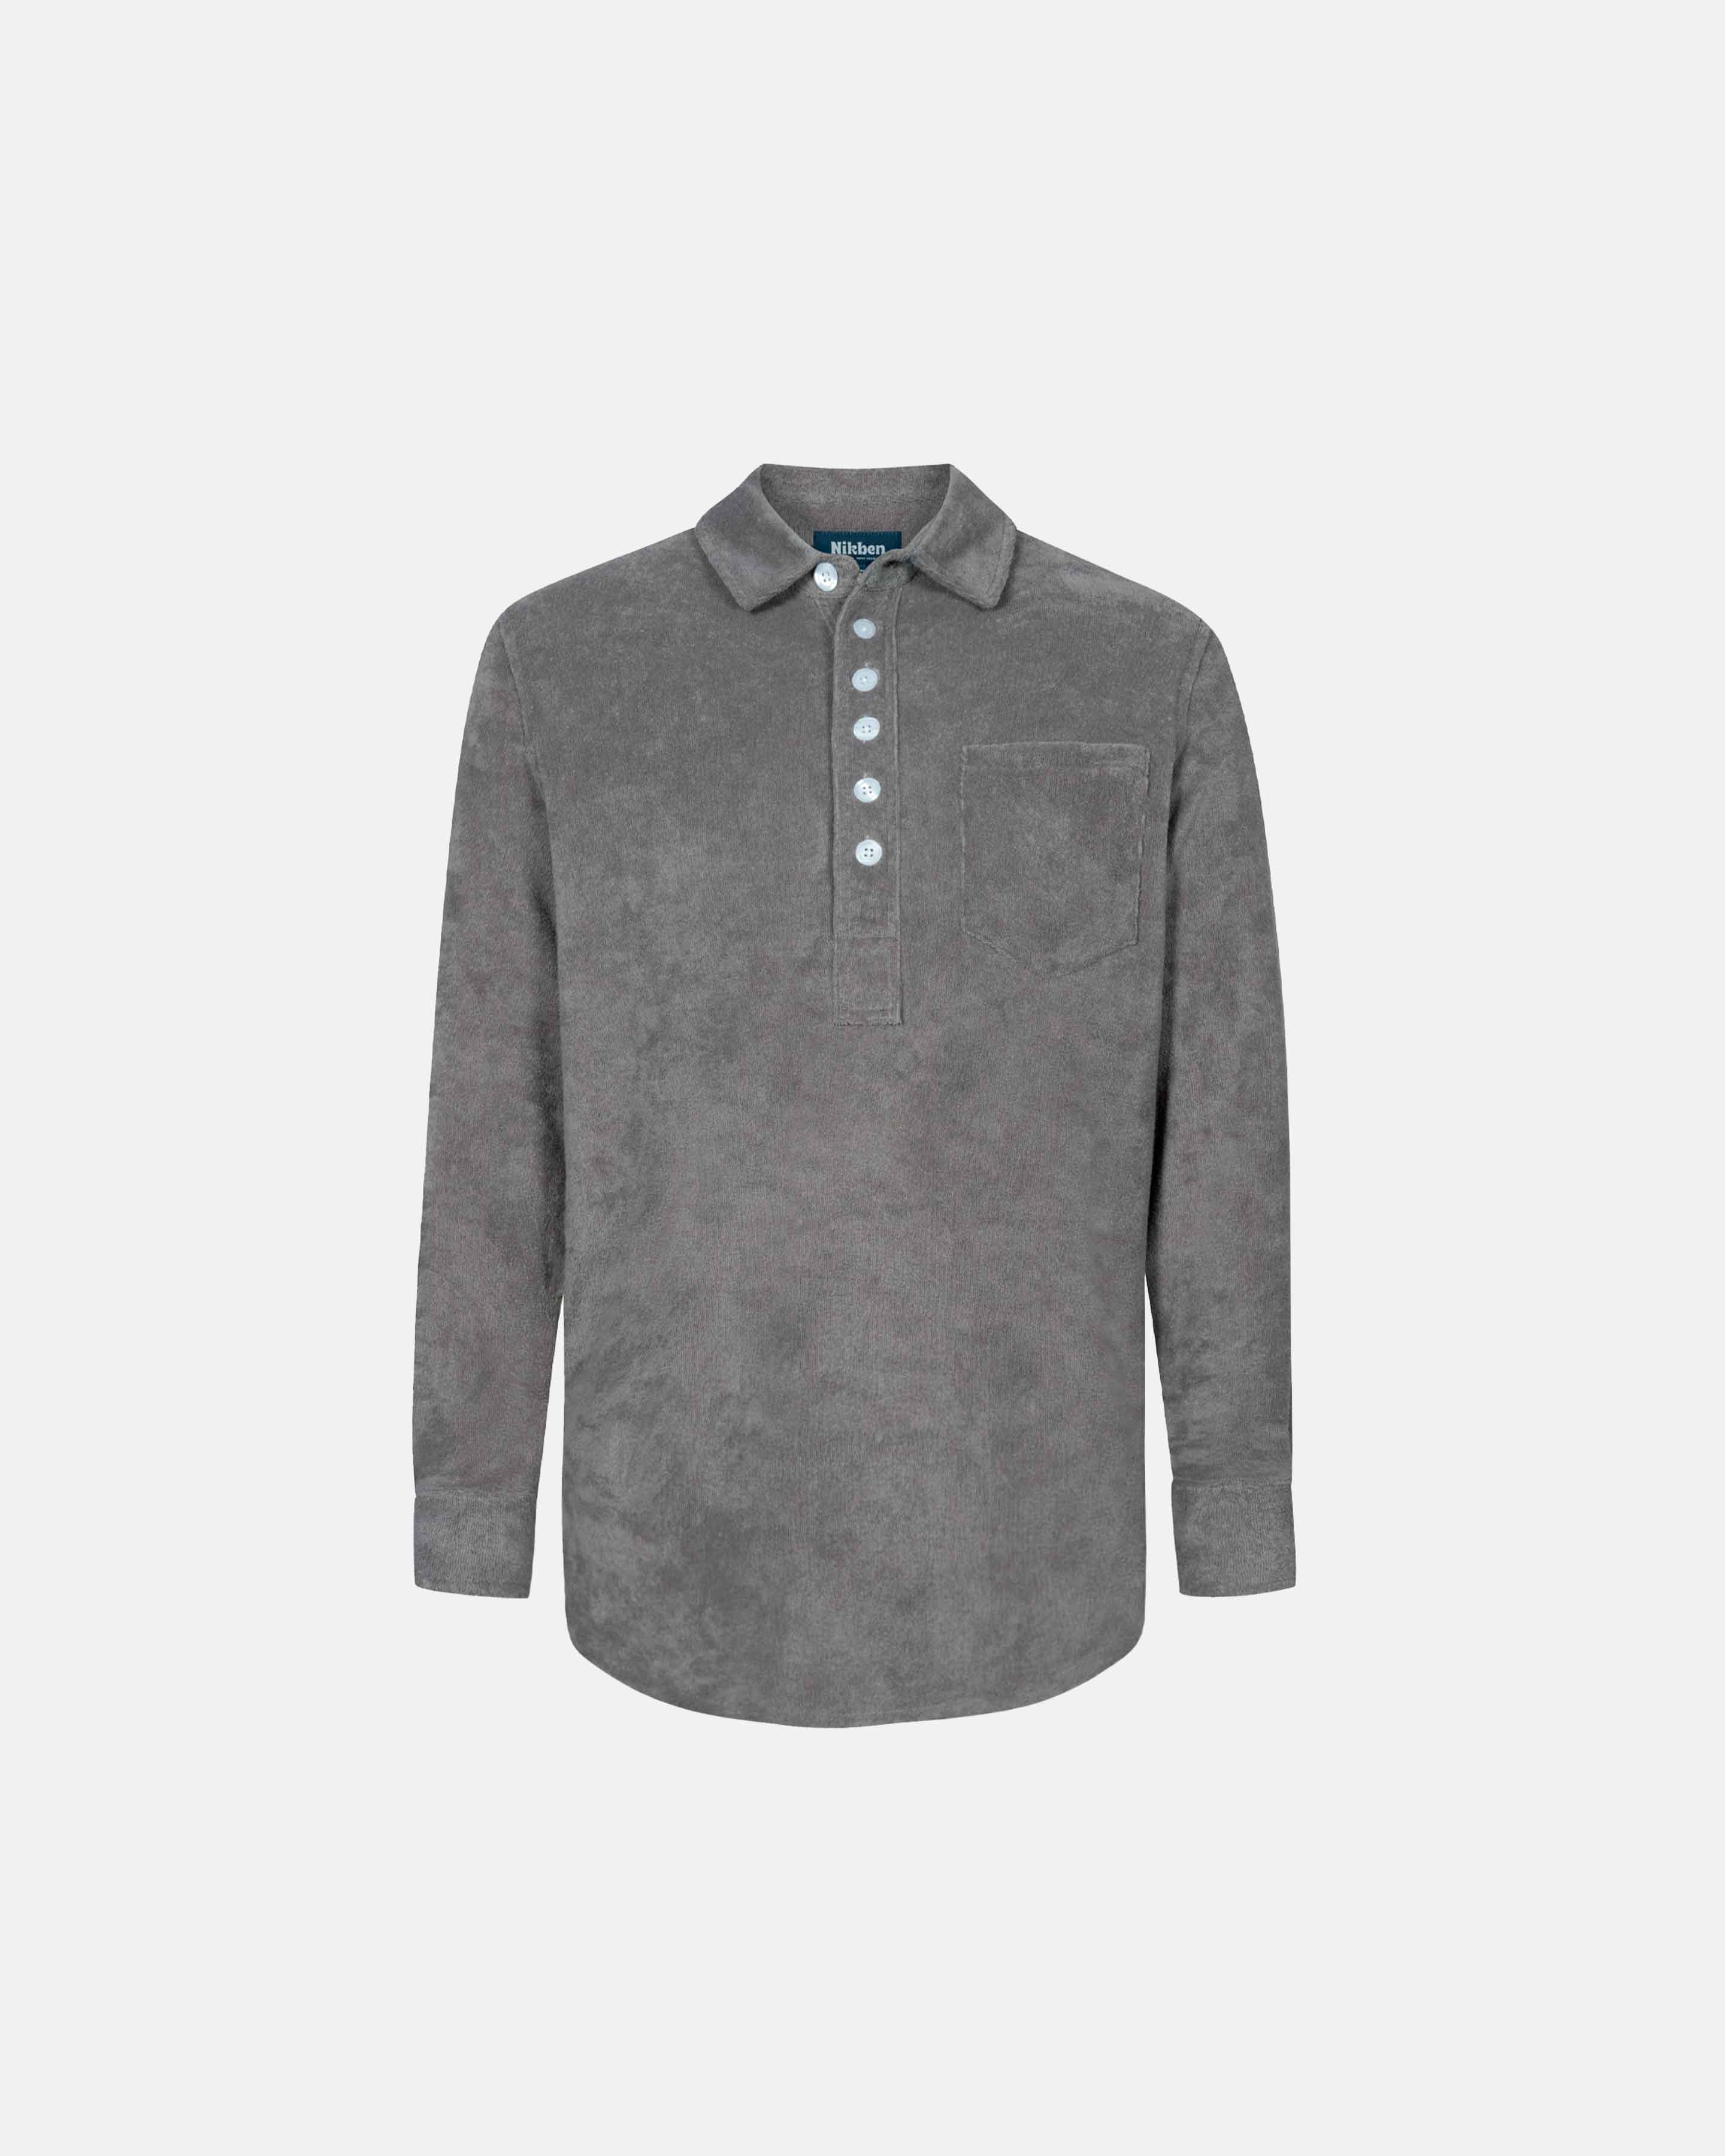 Long sleeve shirt in grey Terry toweling fabric with white buttons